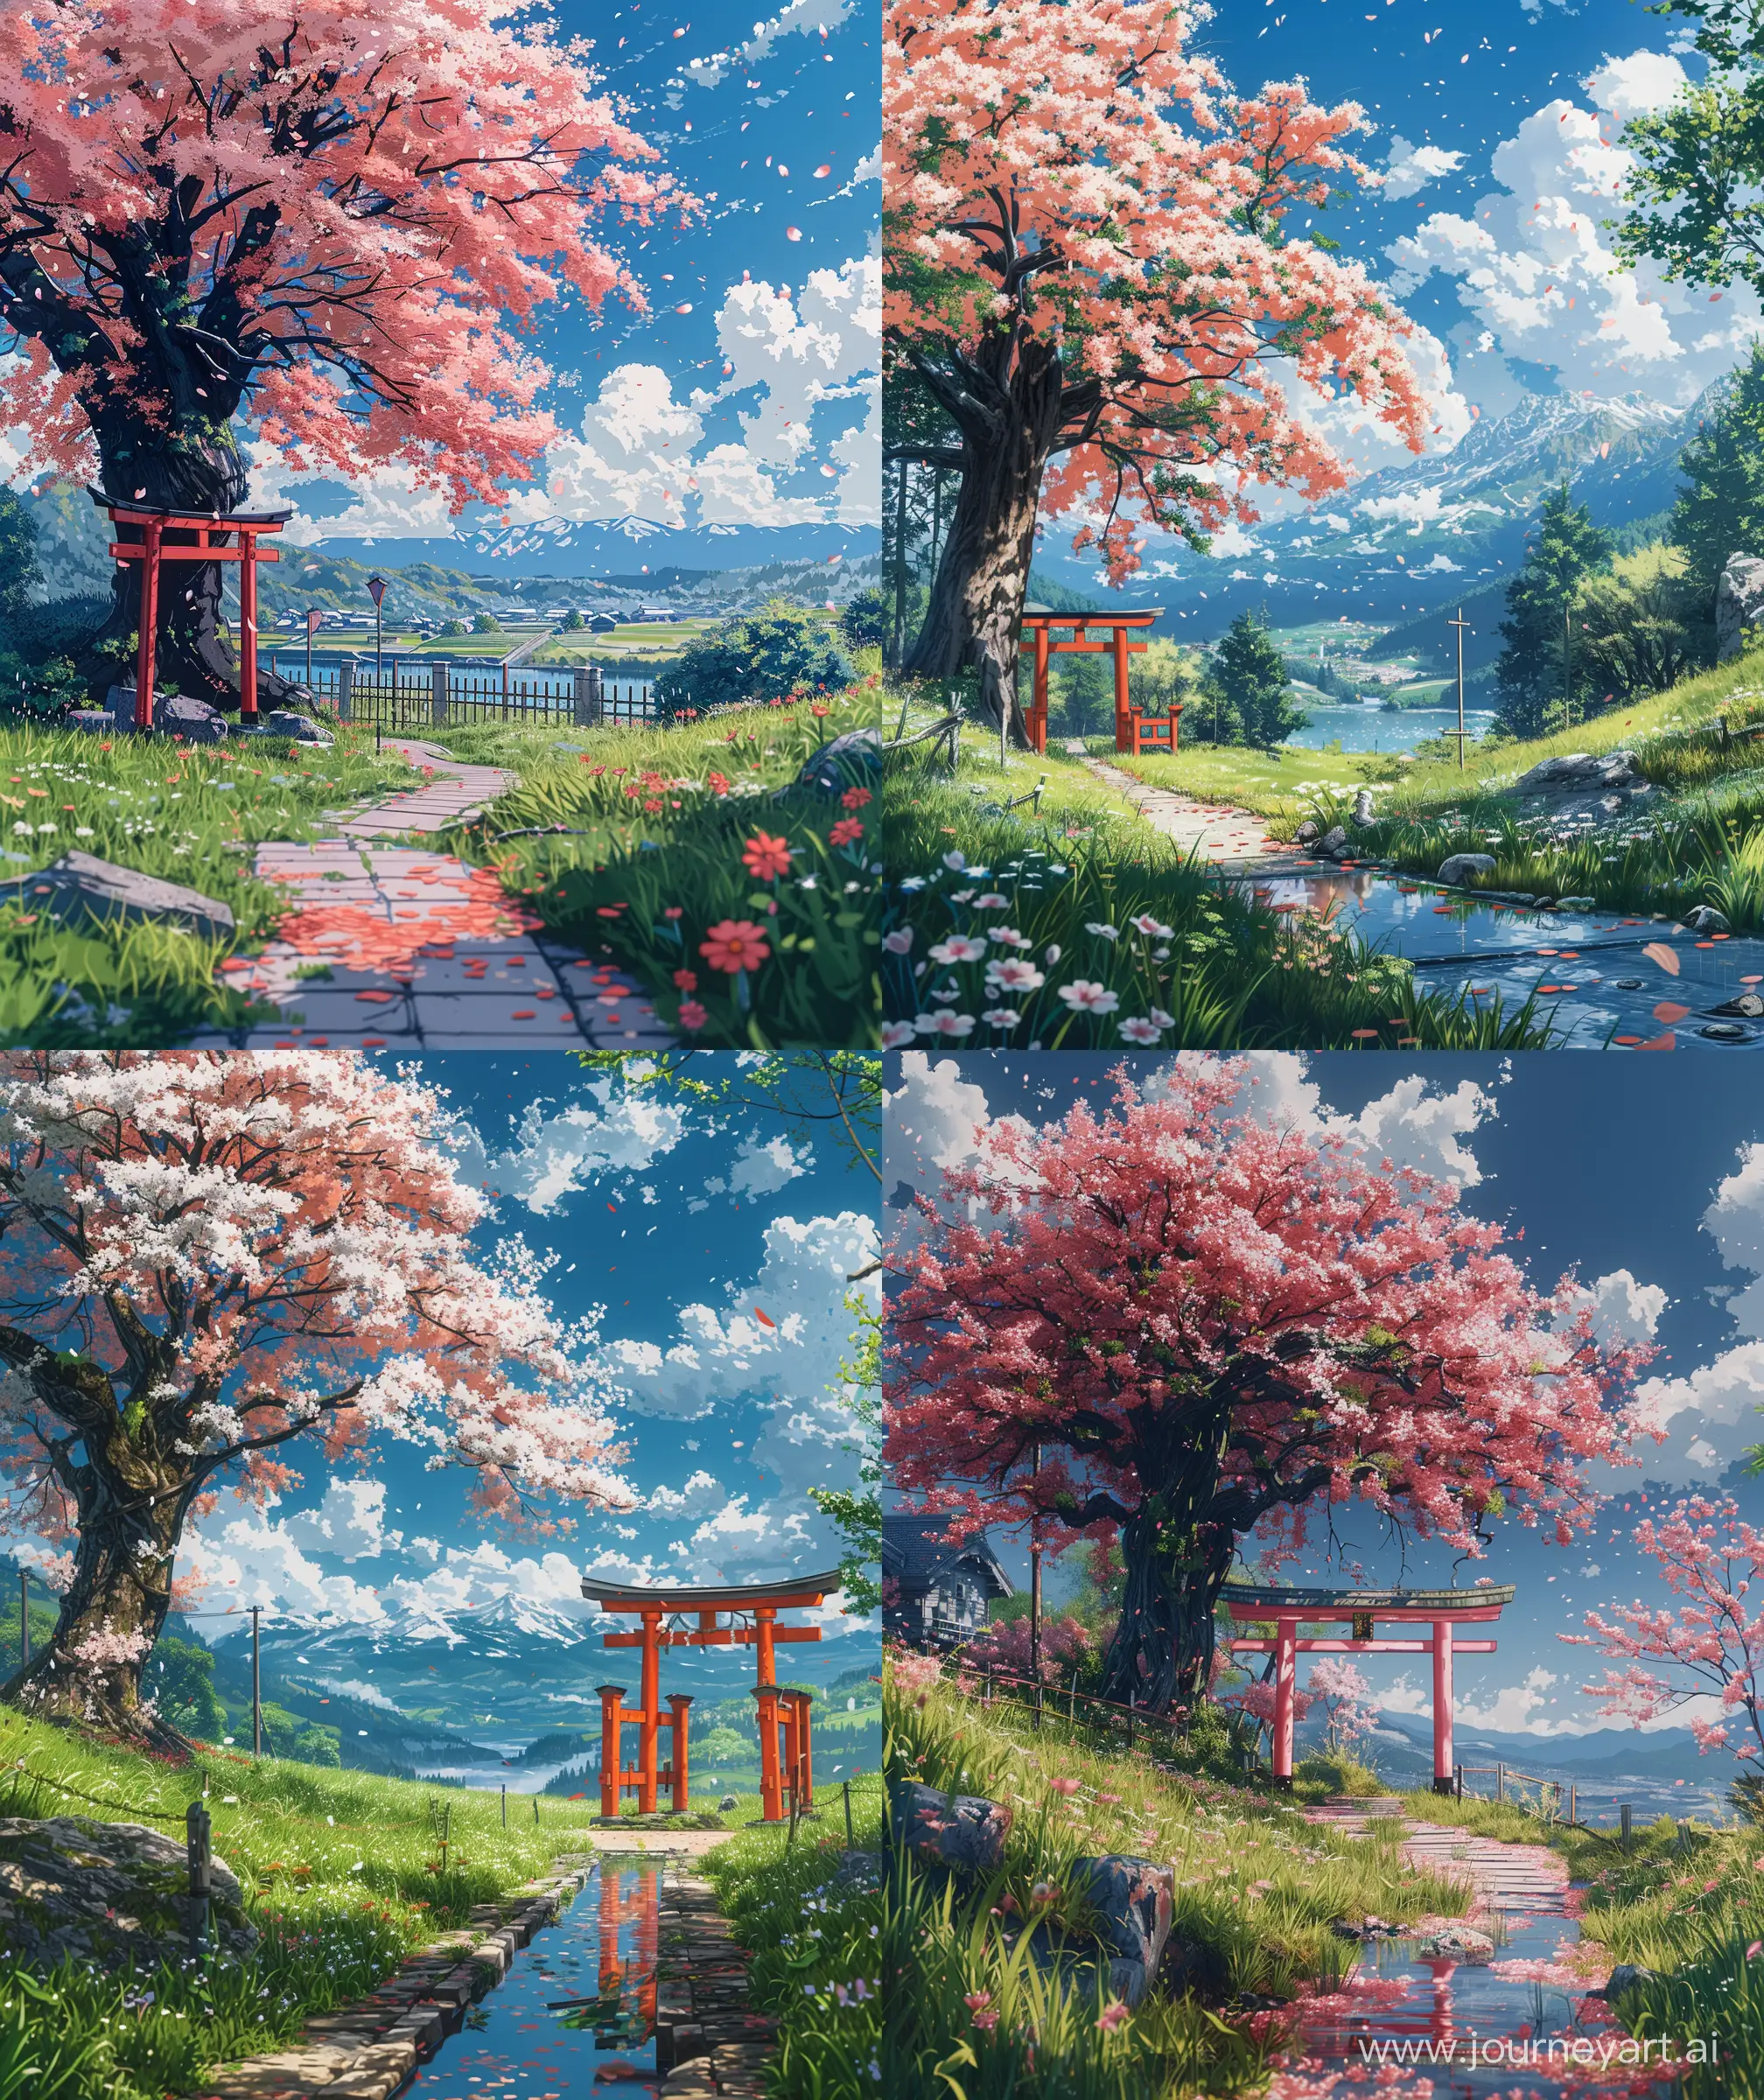 Serene-Anime-Countryside-Cherry-Blossom-Walkway-with-Red-Torii-Gate